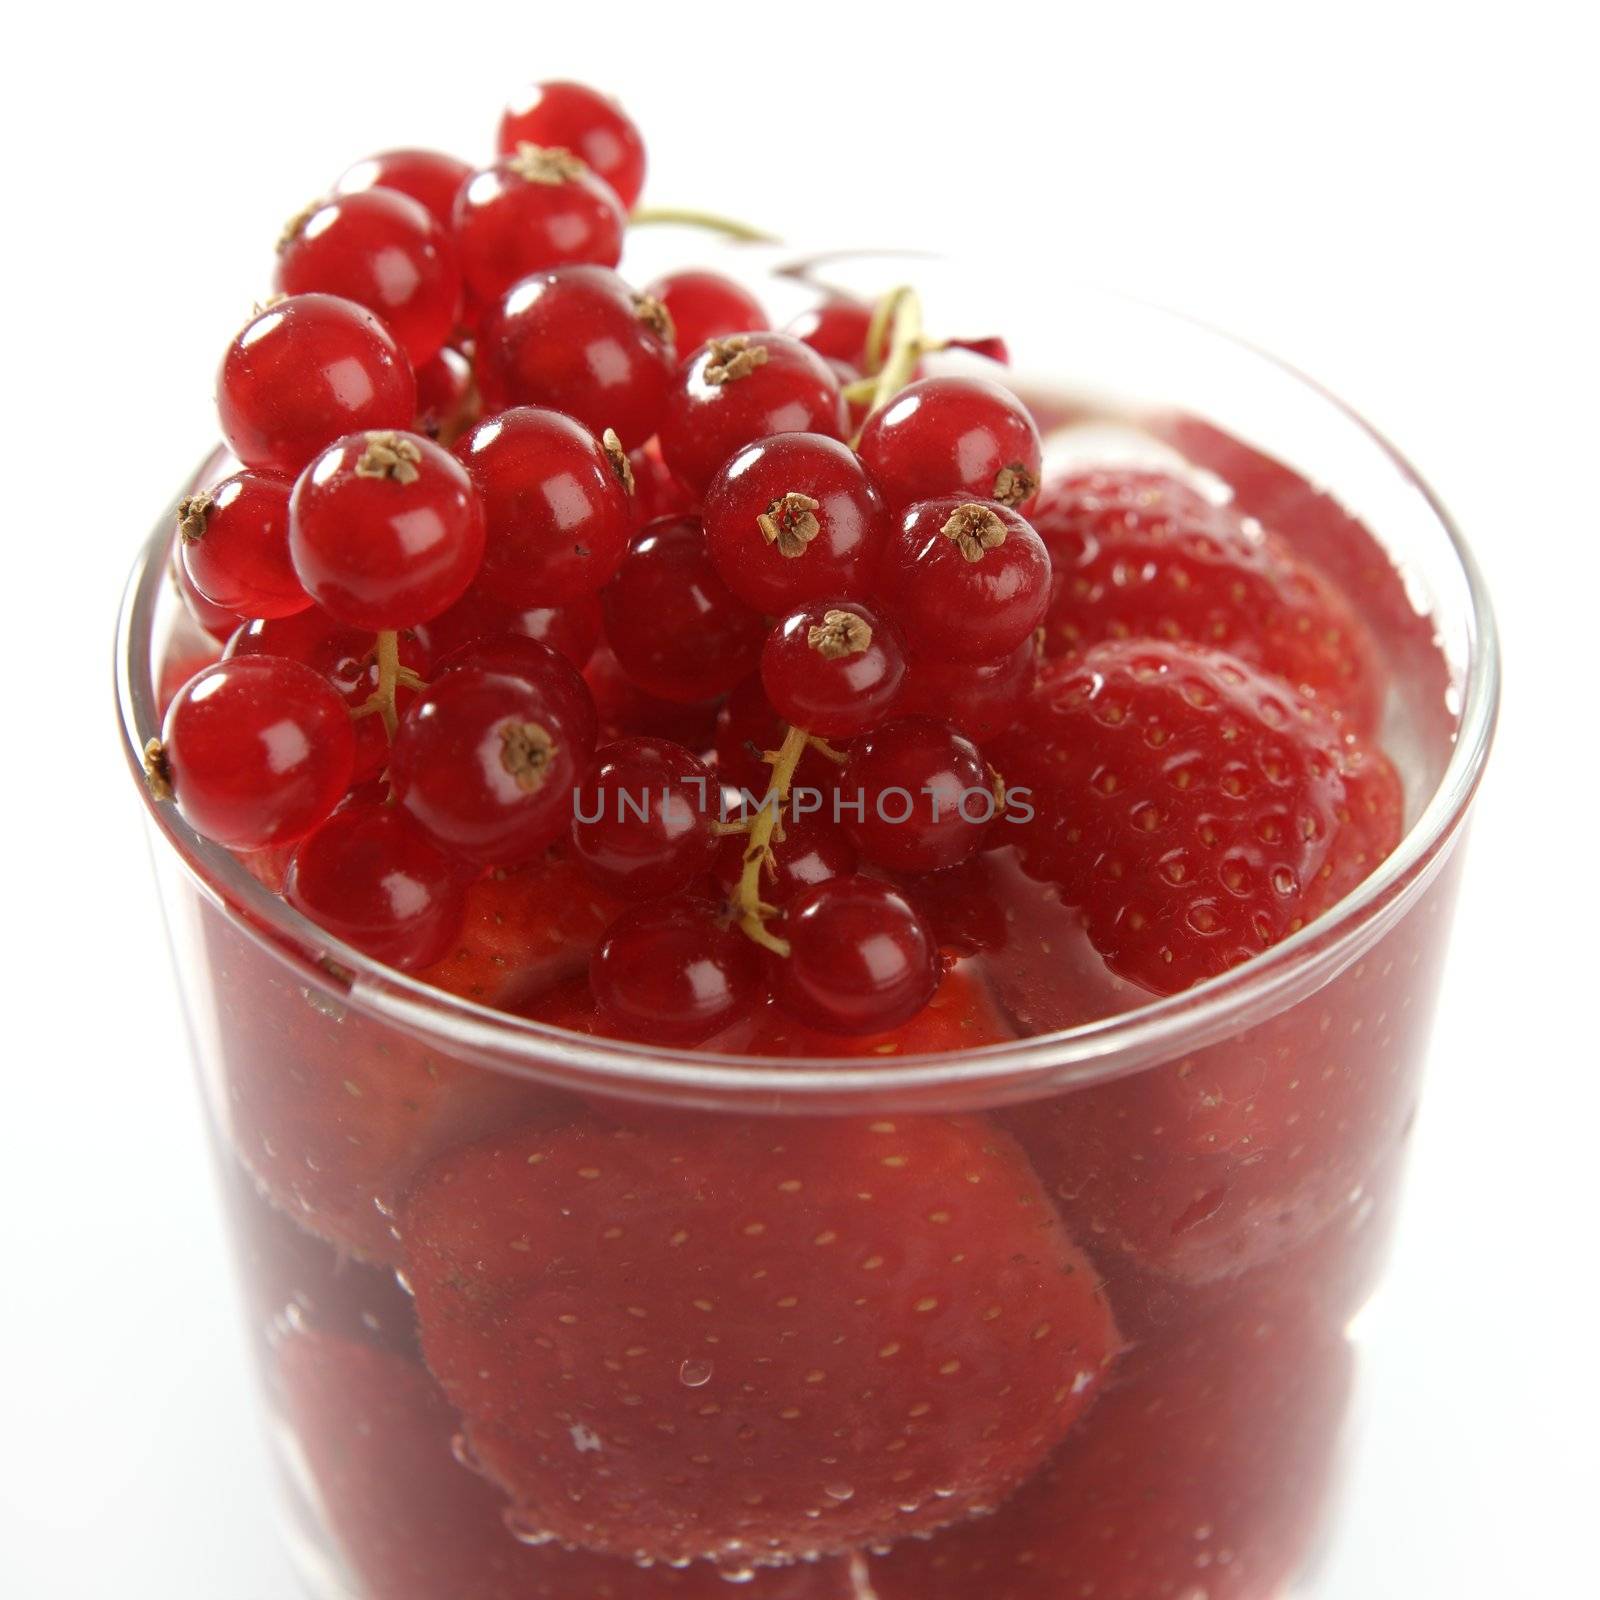 Cup full of strawberries and redcurrant by lunamarina